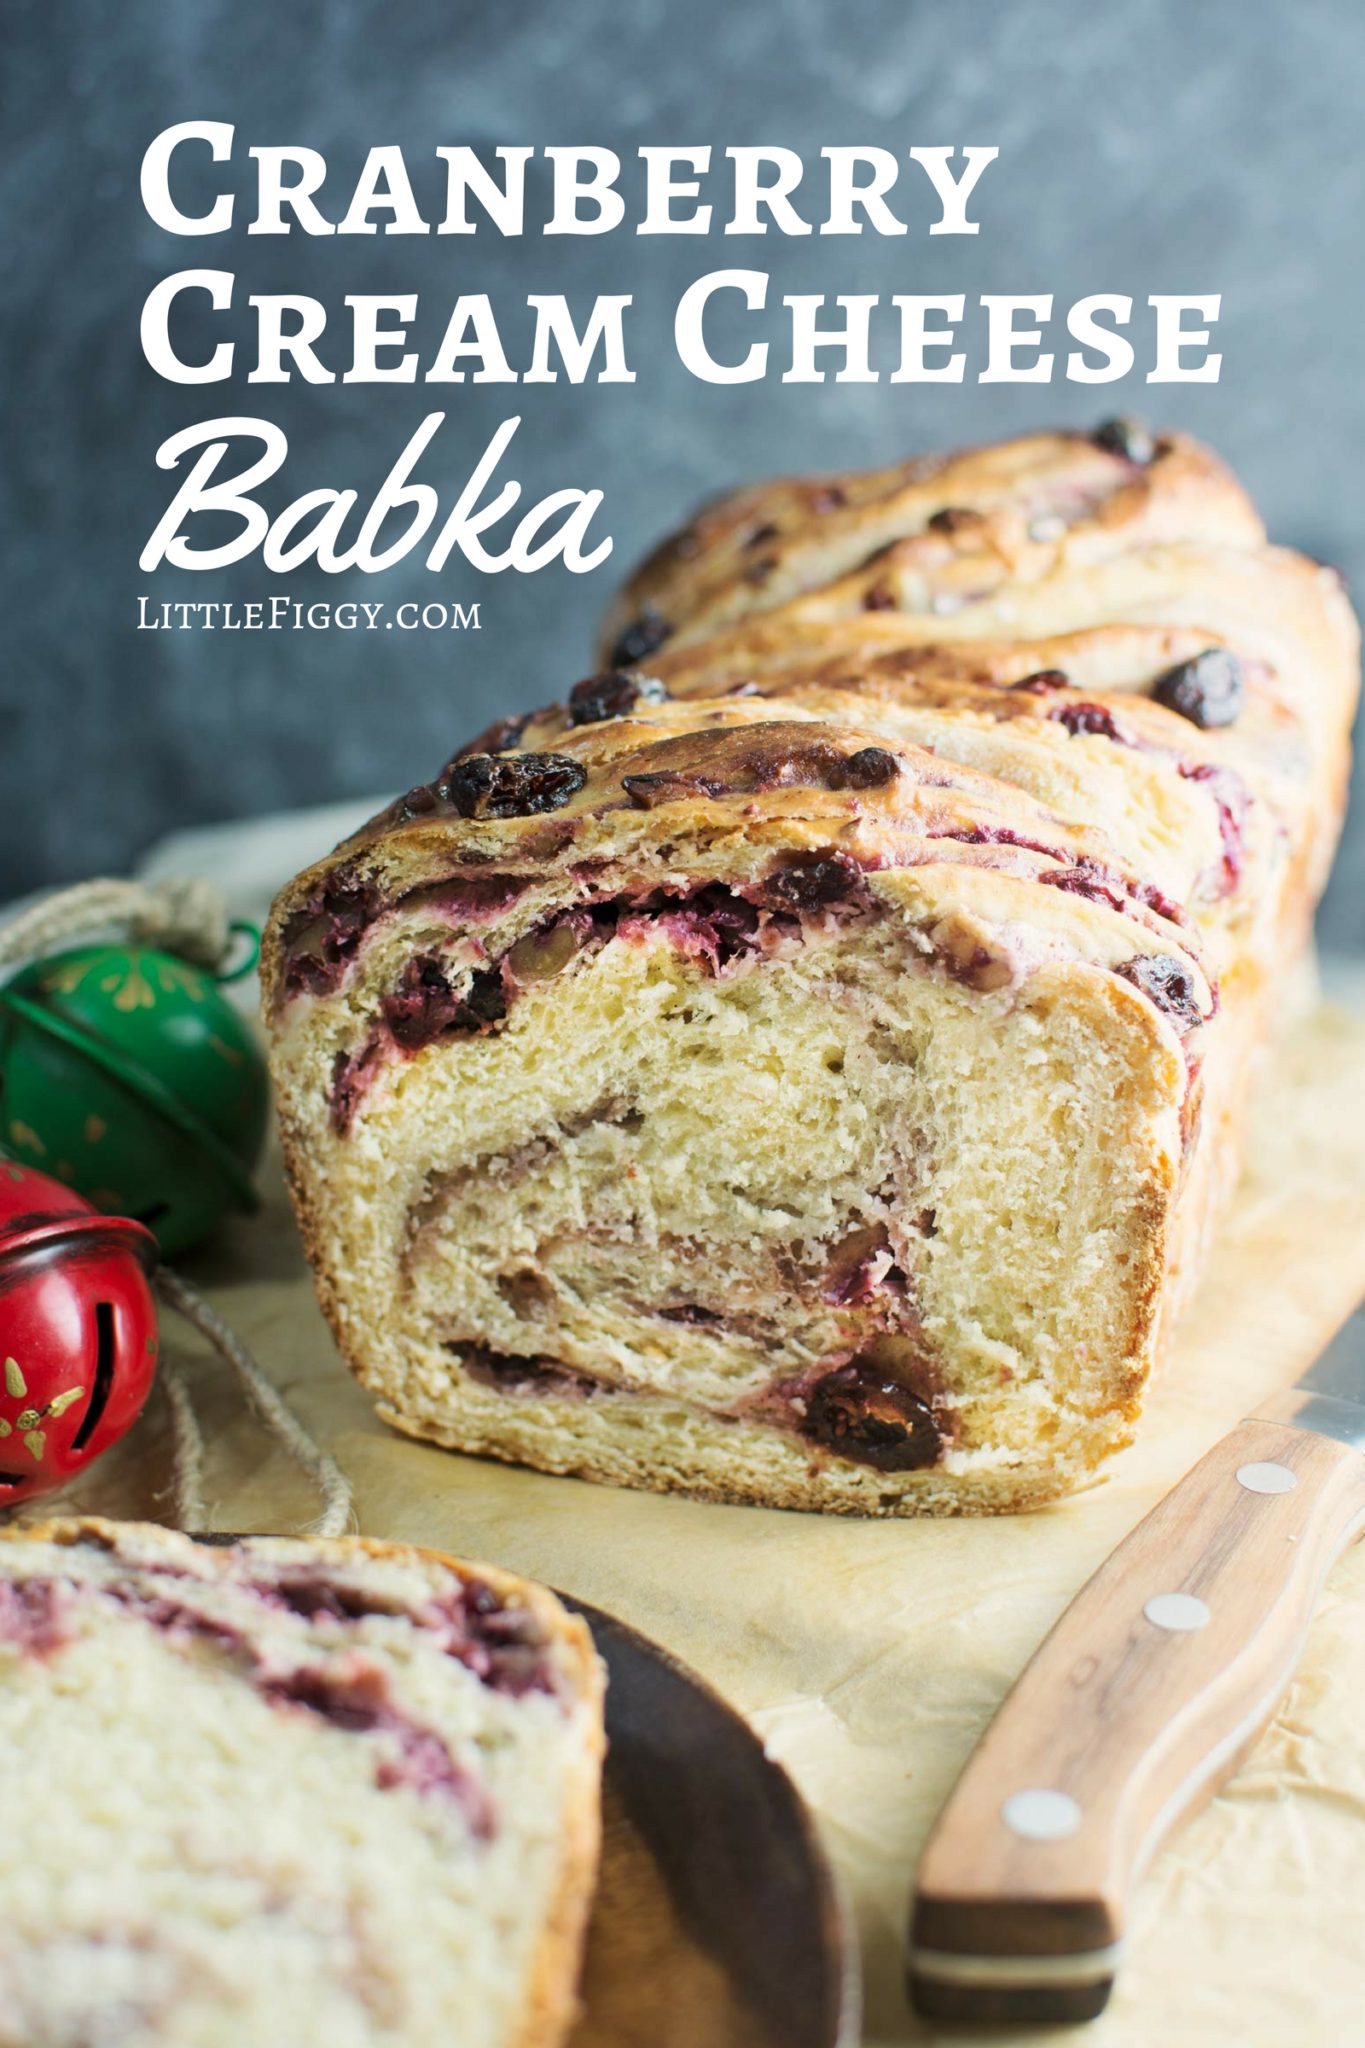 Discover the Magic of Tea and unwrap the flavor of the season with this Cranberry Cream Cheese Babka! Get the recipe @LittleFiggyFood #celestialseasonings #themagicoftea #ad